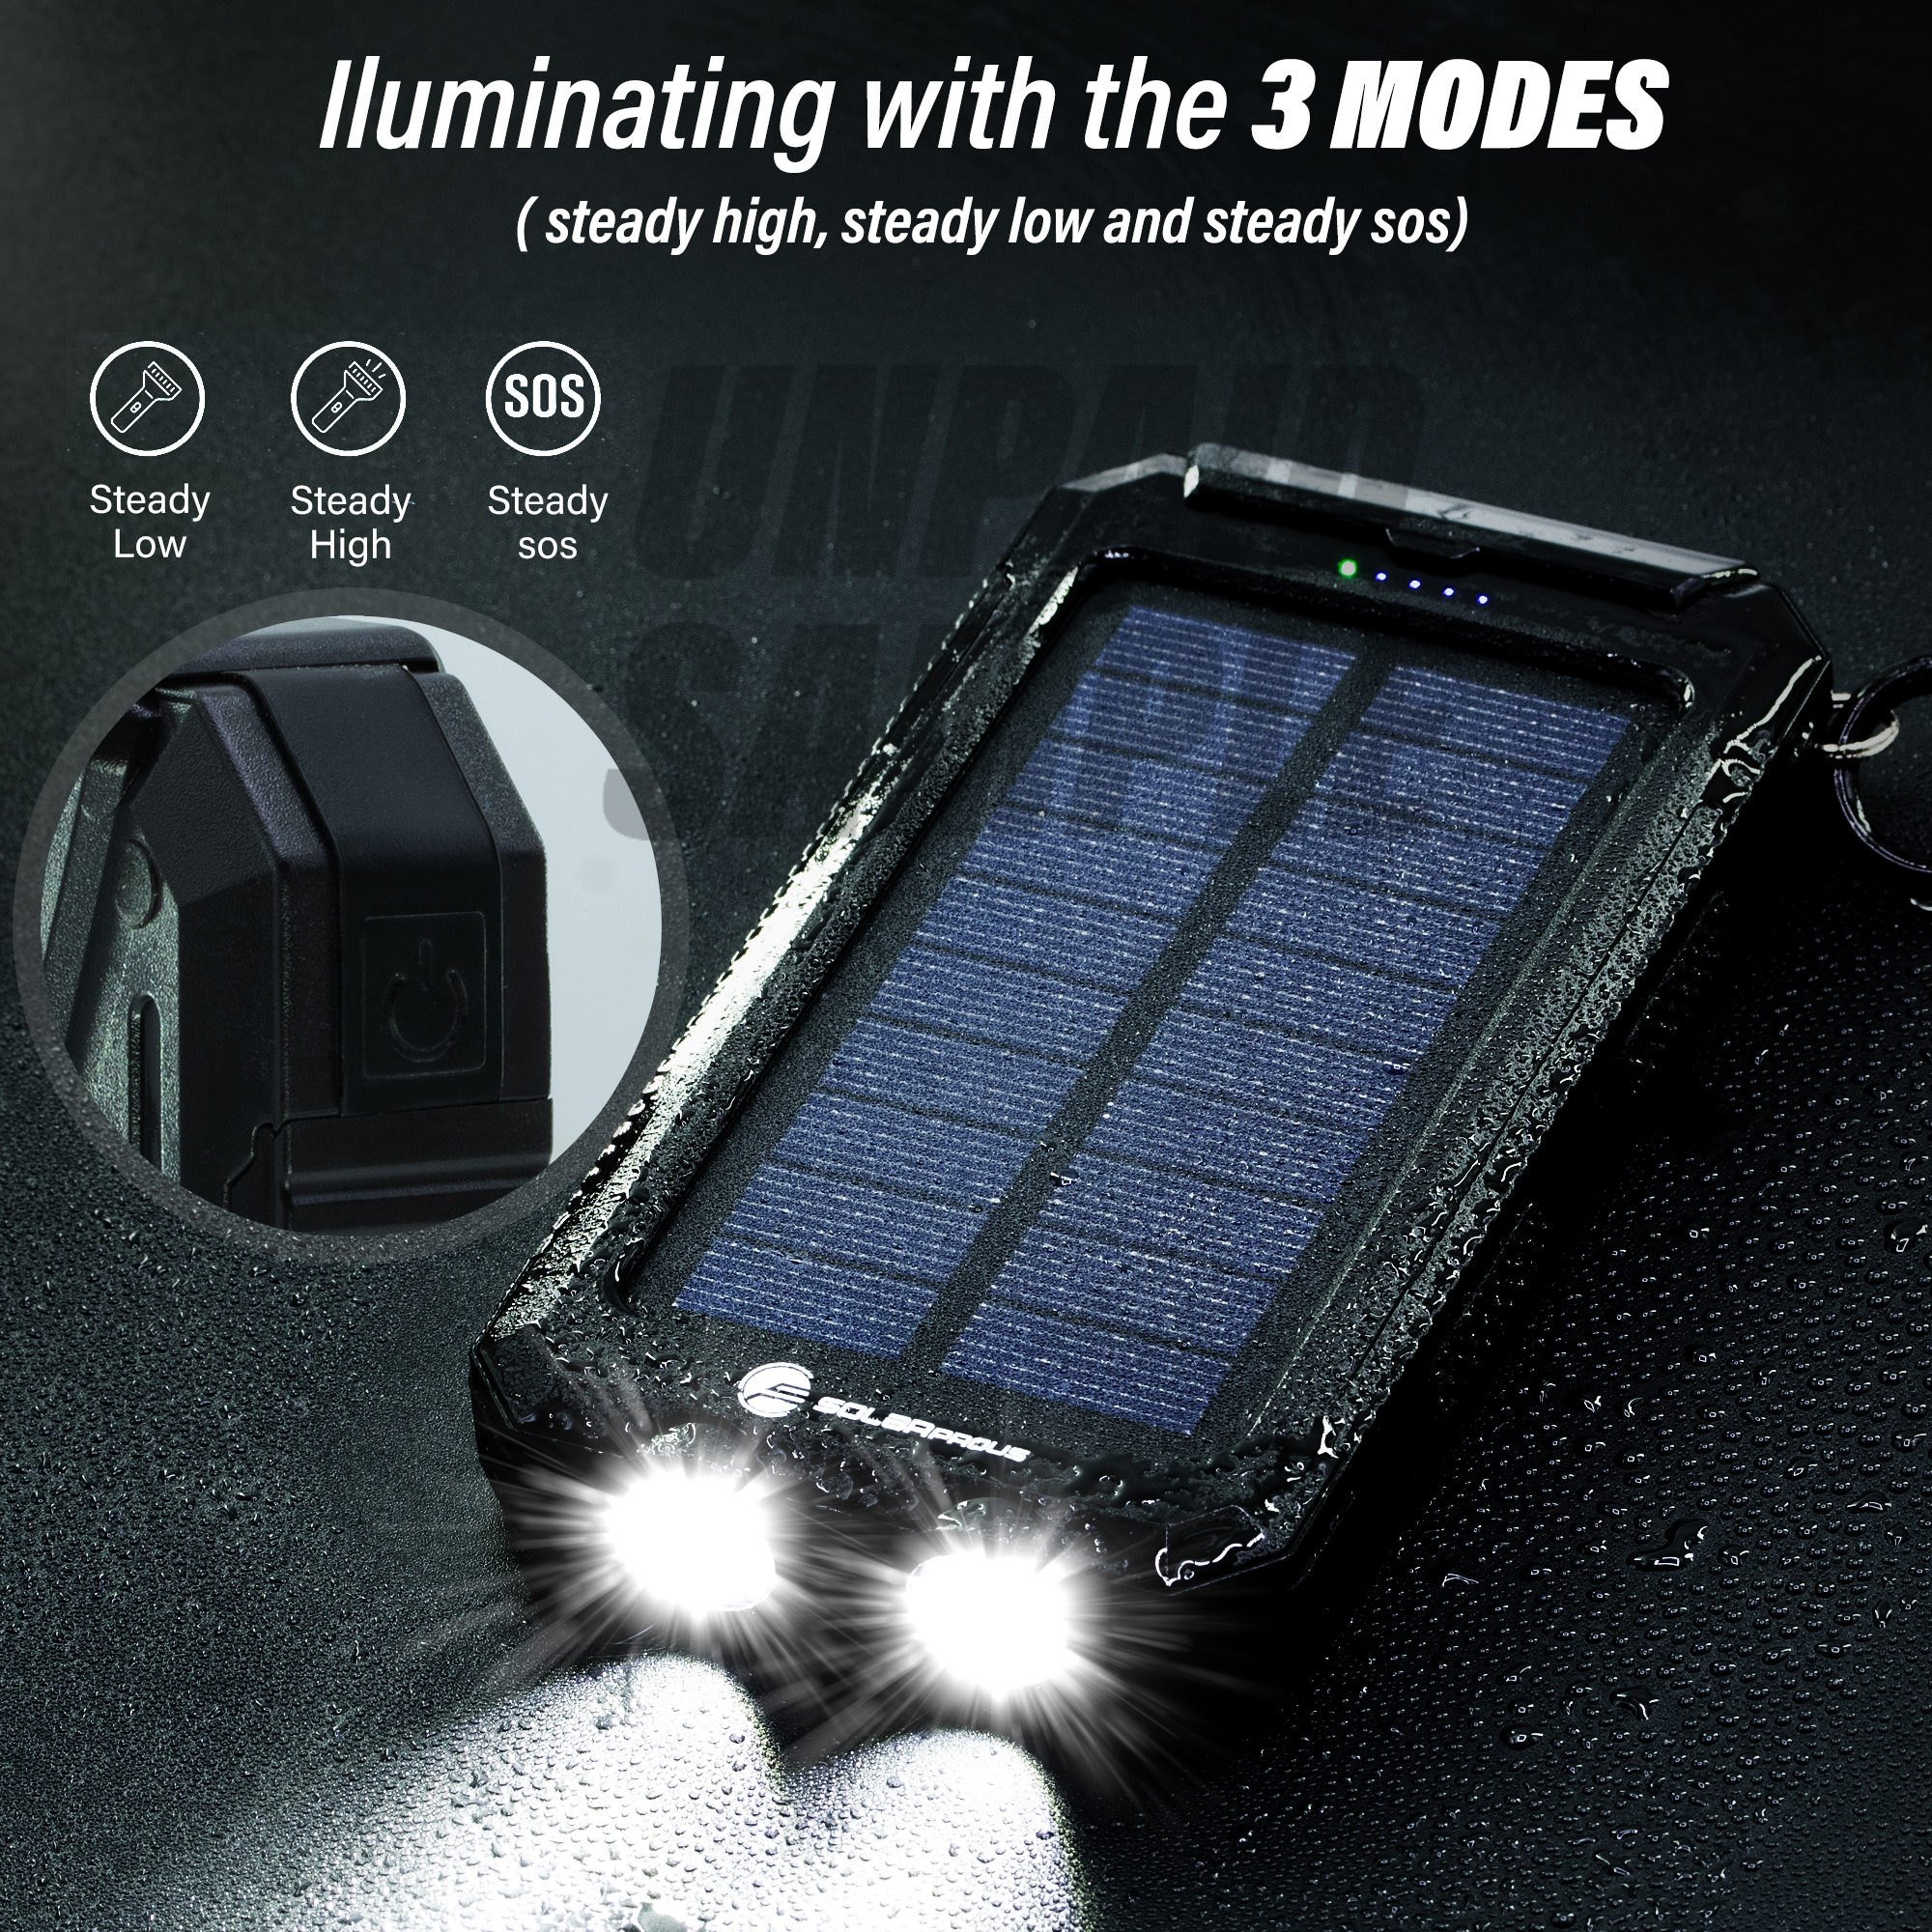 Solar portable phone charger